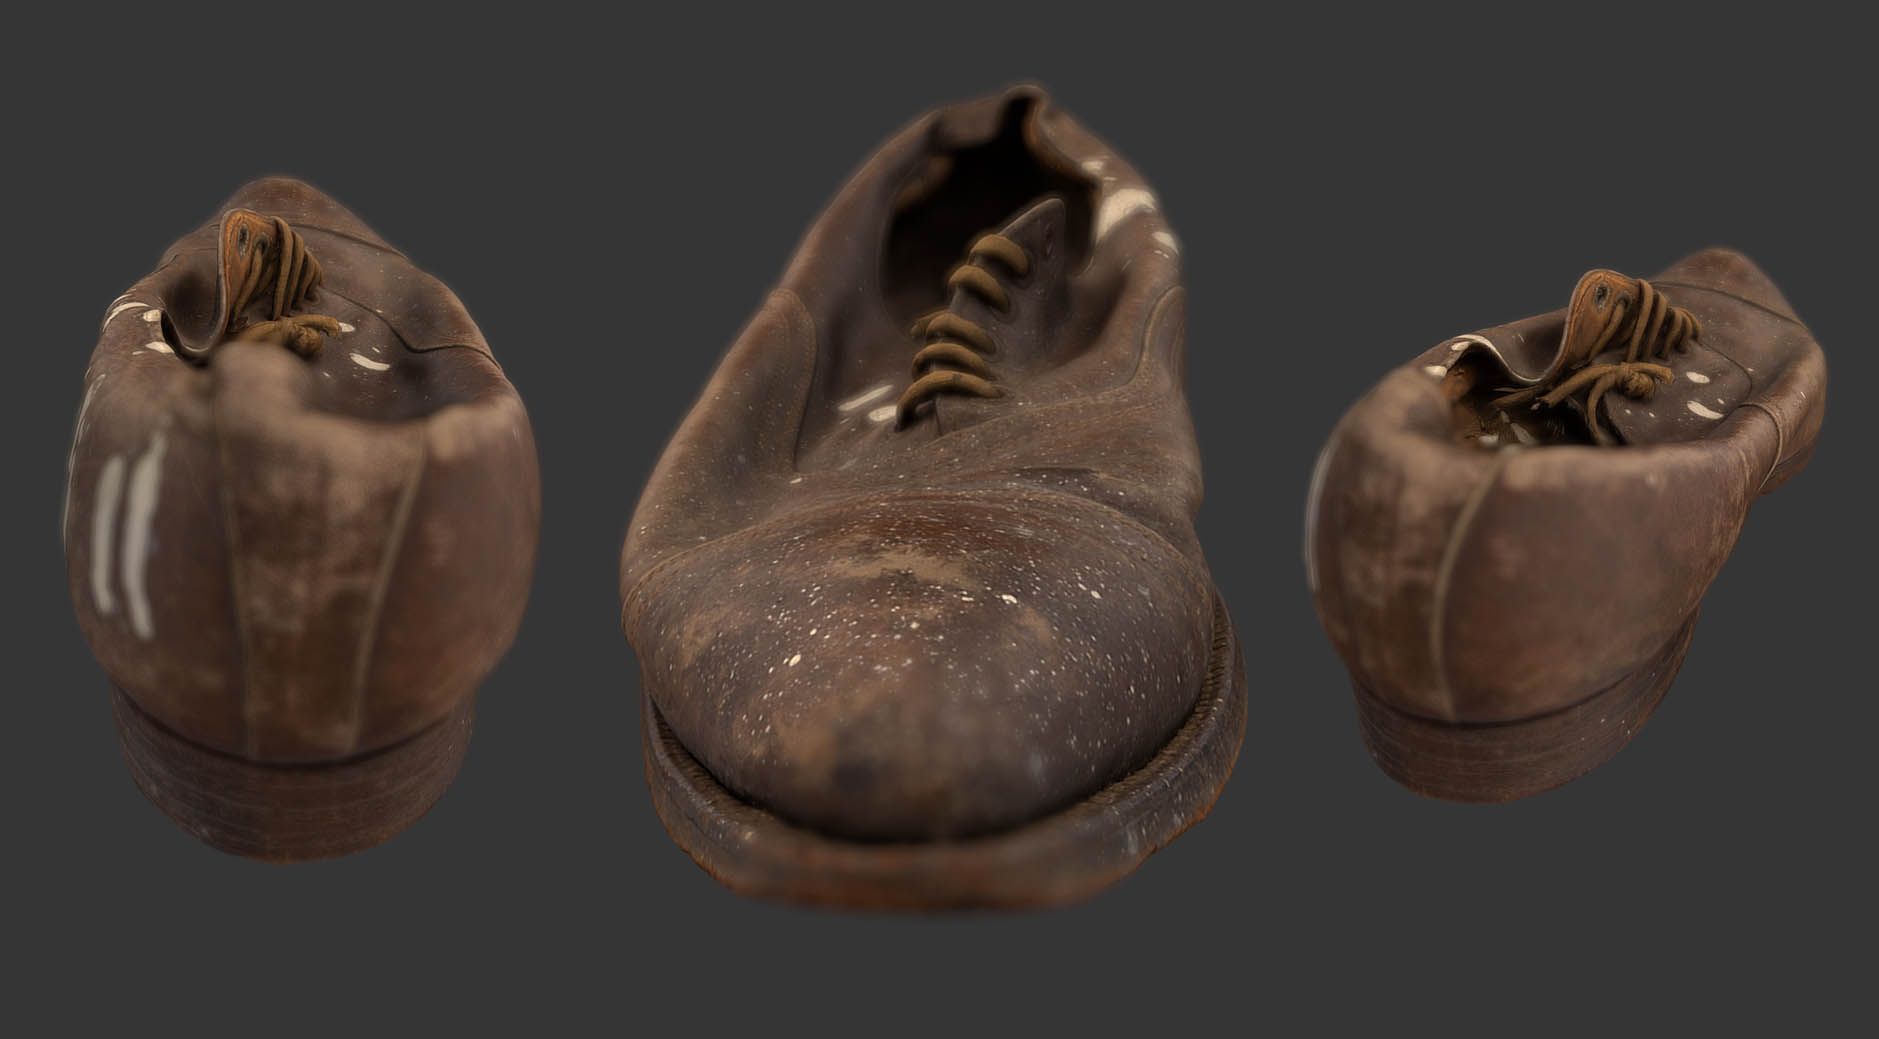 Image of a 3D scan of a dark brown leather shoe on a dark background